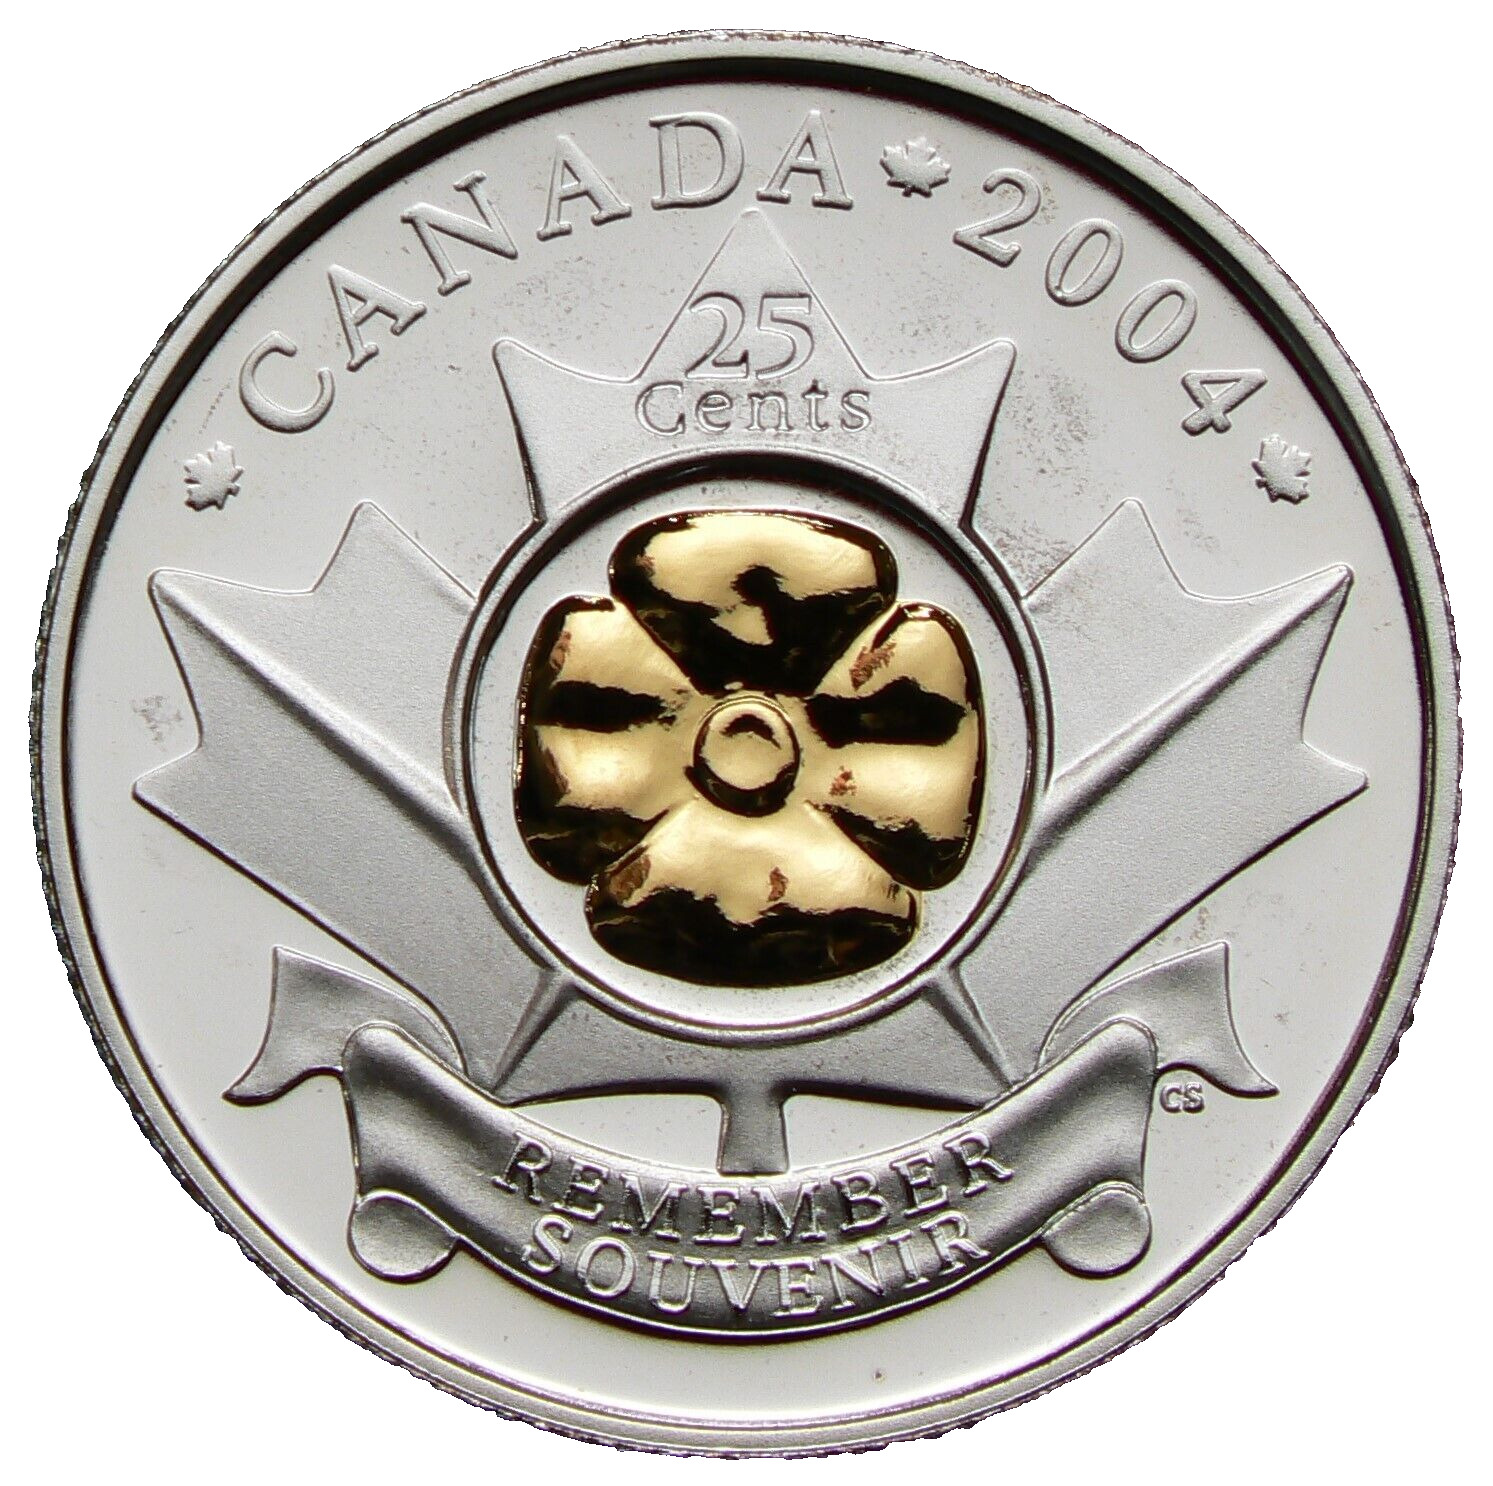 2004 Poppy Canada 25 Cents Silver Proof Gold Plating #19989